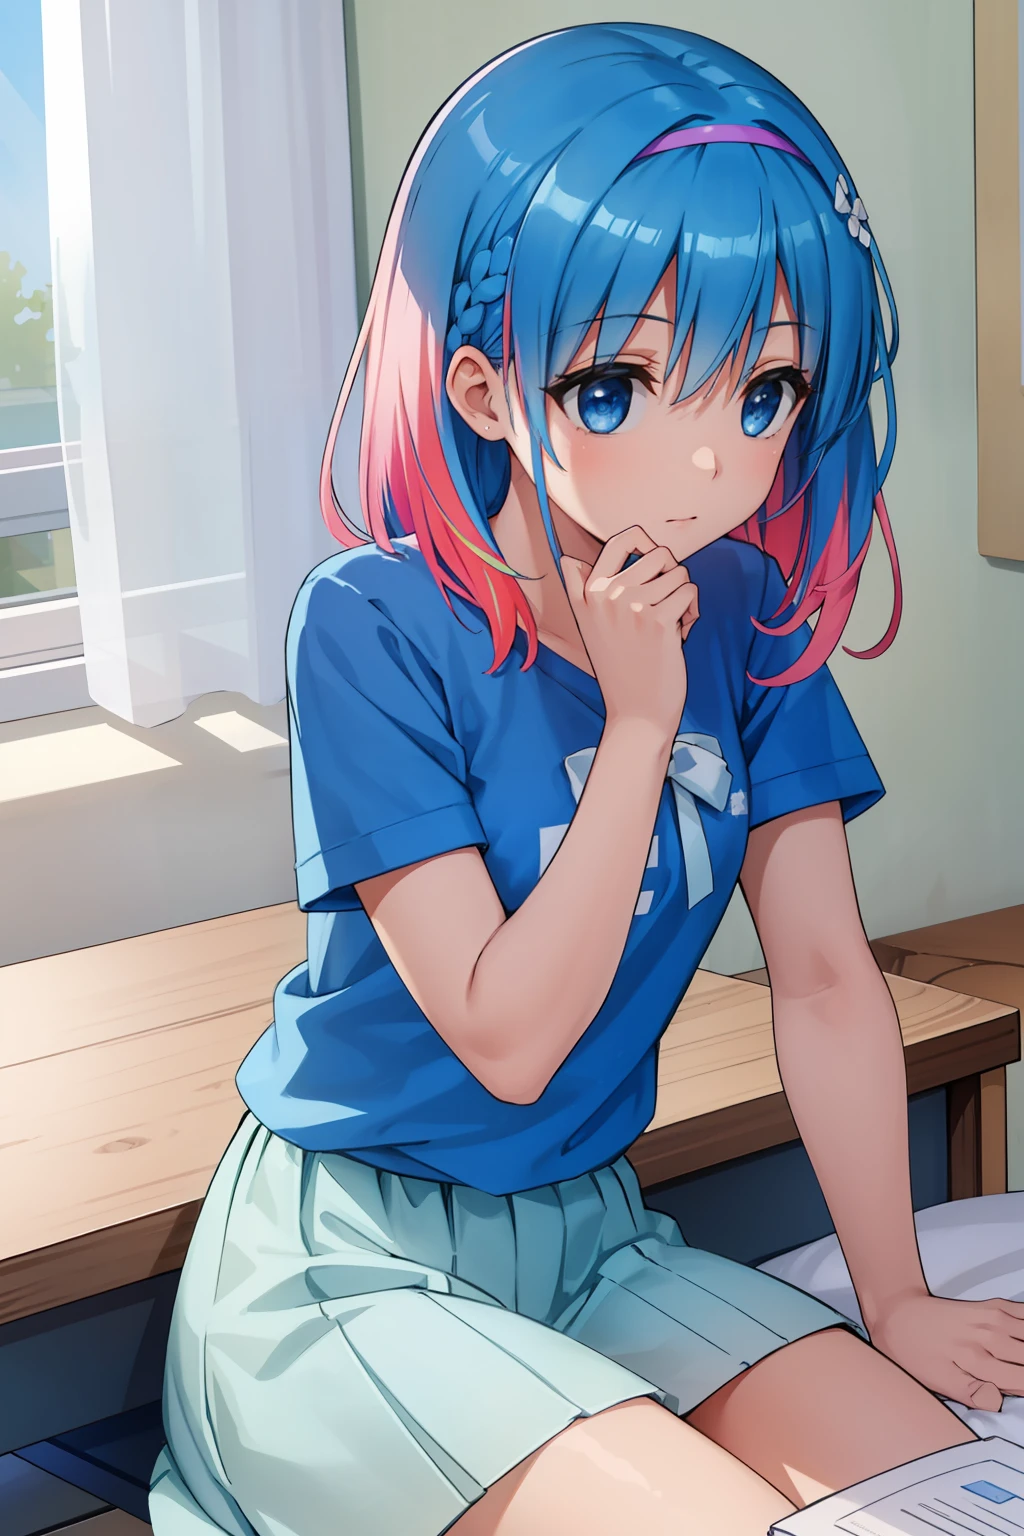 one-girl, Wear blue short sleeves, blue color eyes, on top of the bed,pillow head, Study desk, janelas, rays of sunshine, multicolored hair, bow hair band, hyper HD, Masterpiece, ccurate, High details, Best quality